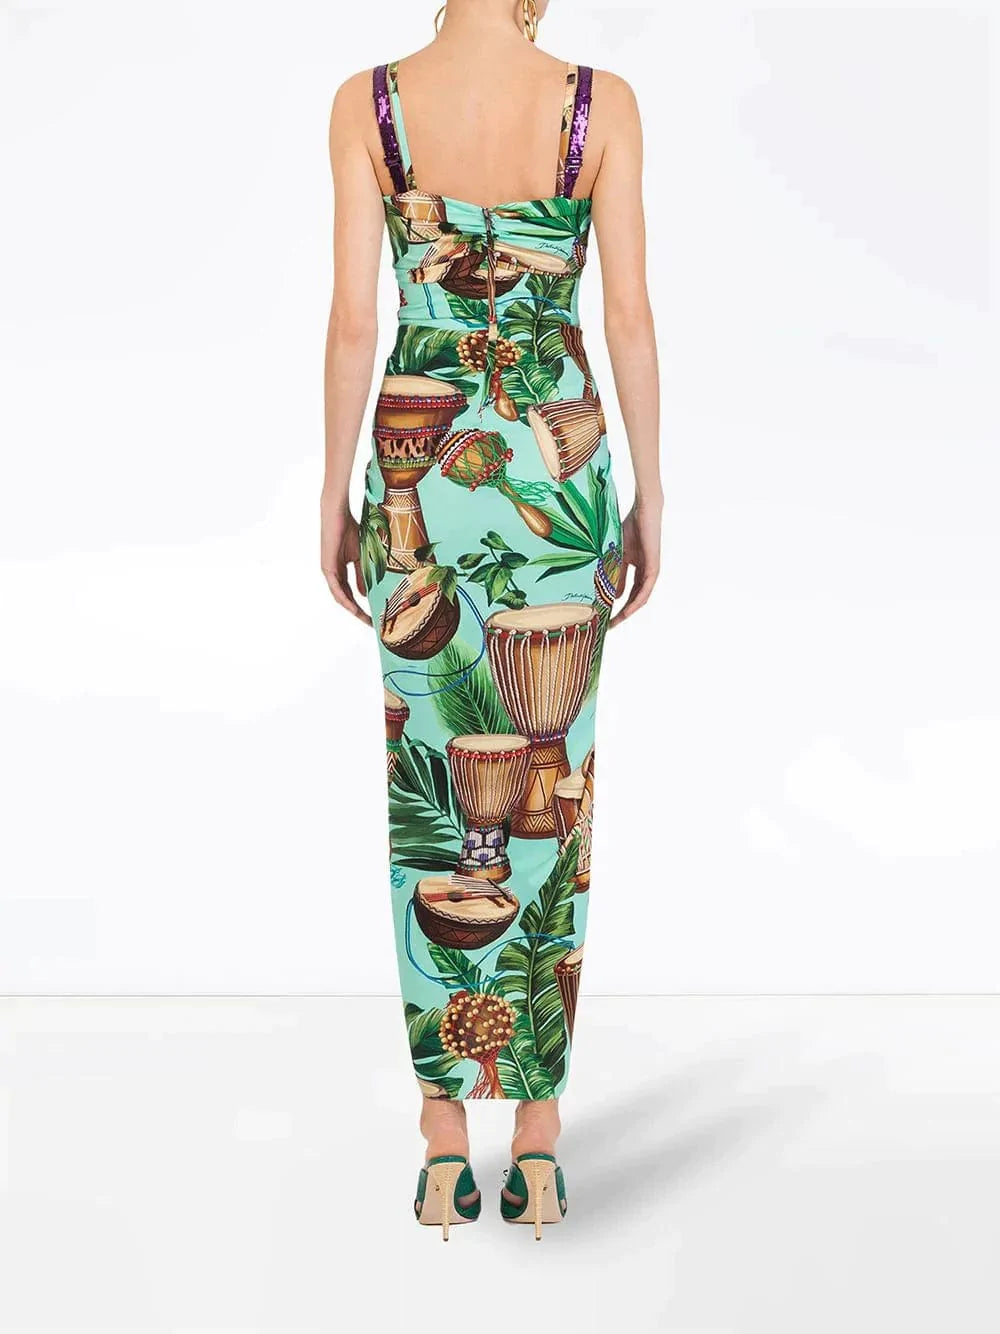 Dolce & Gabbana Tropical Print Fitted Dress